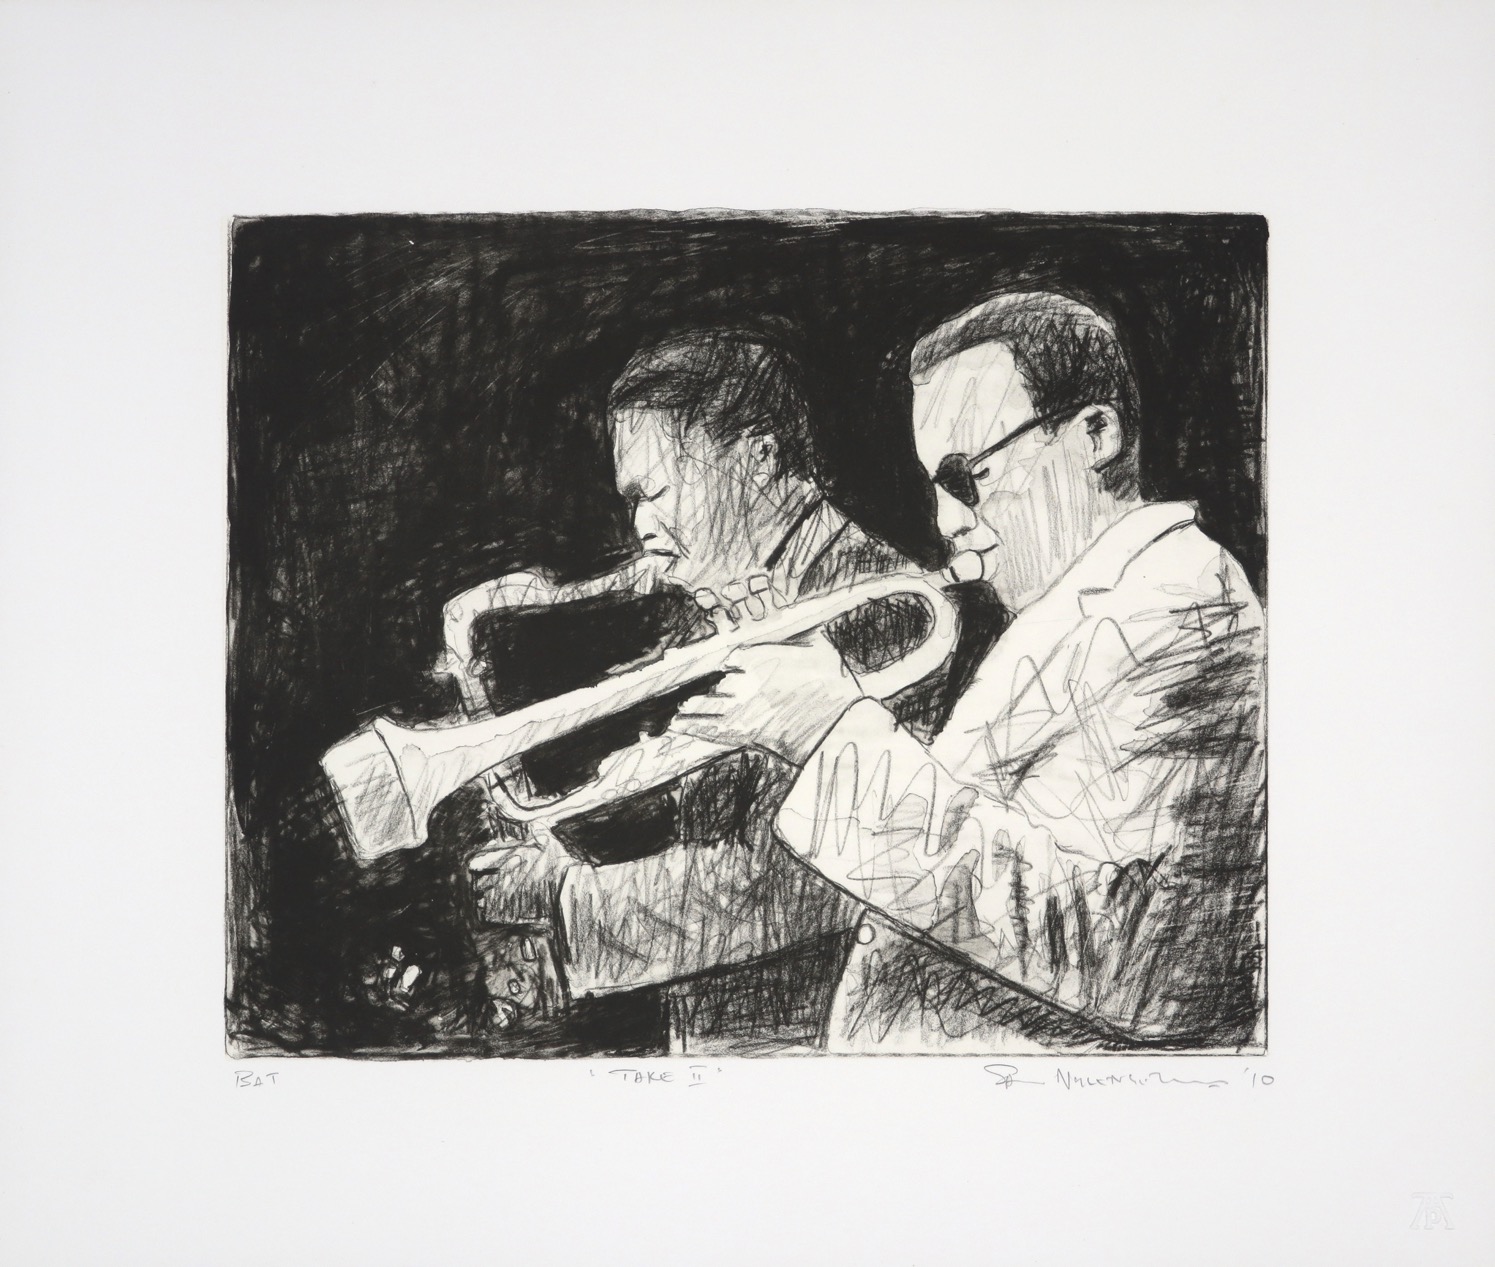 Profile drawing of two jazz musicians playing instruments on stage